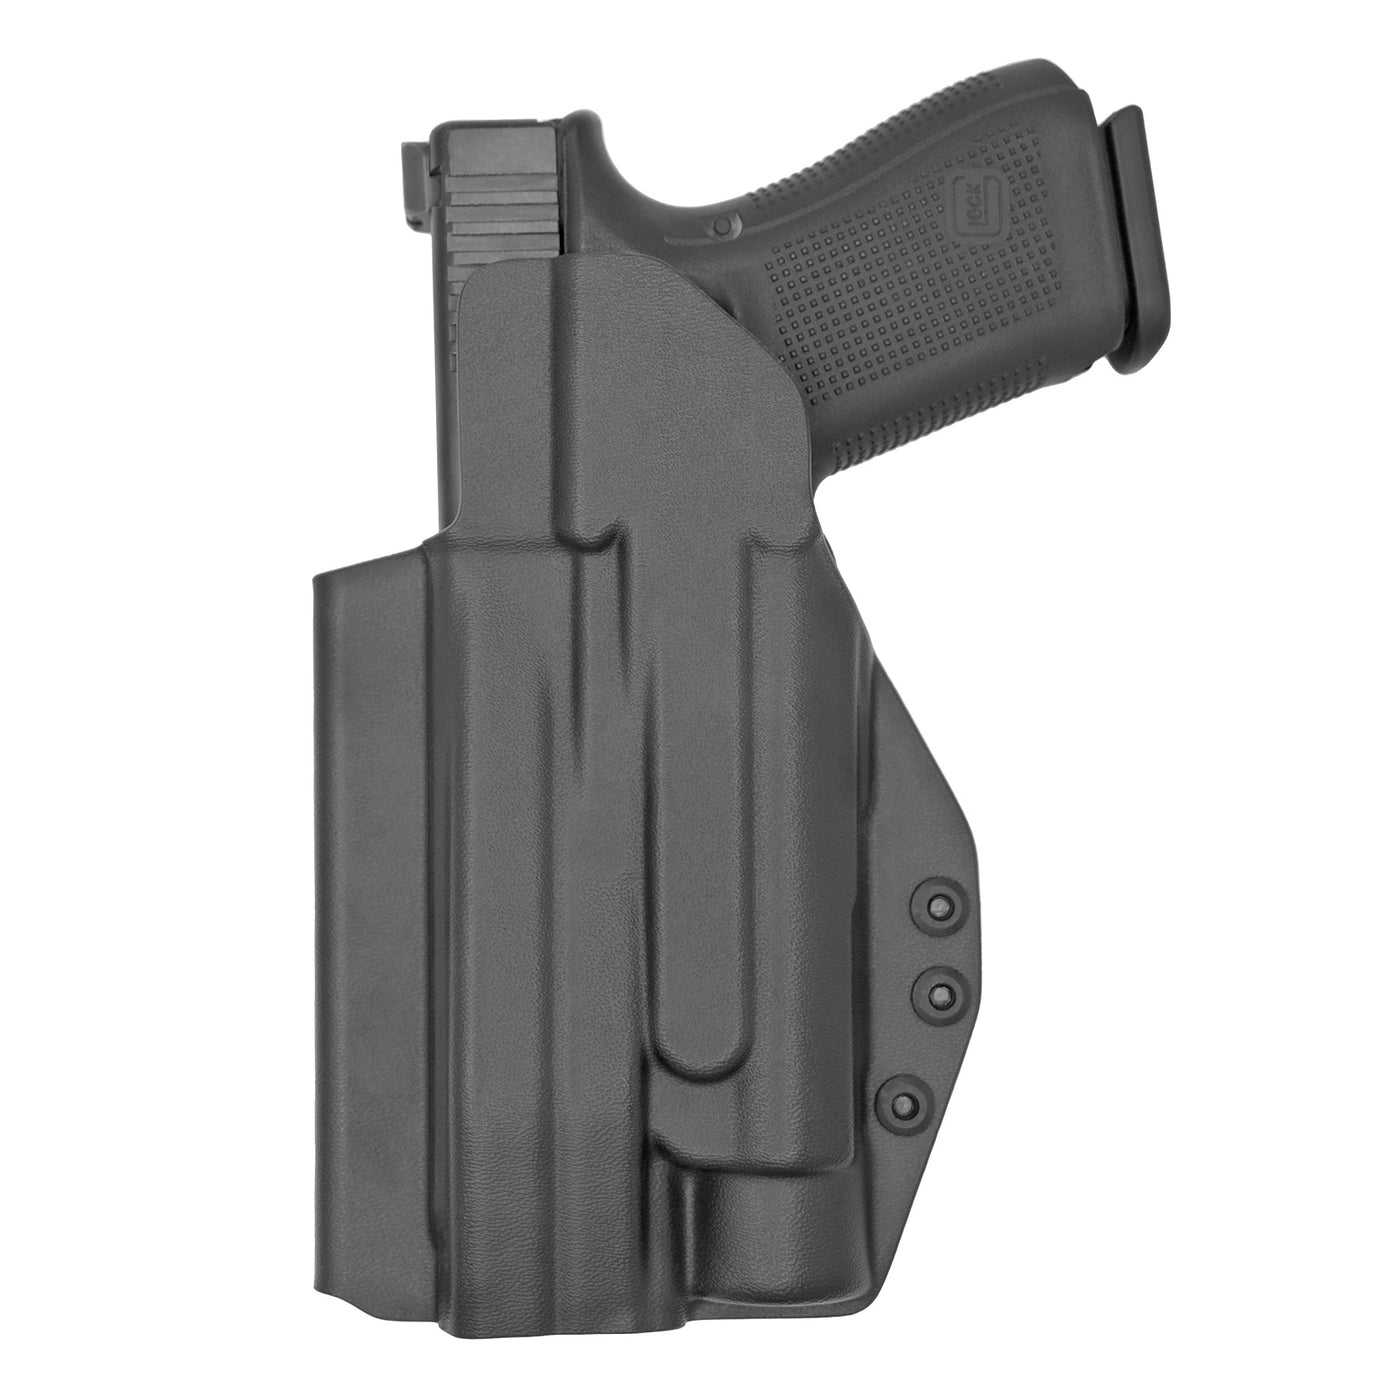 C&G Holsters Quickship IWB Tactical Poly80 Streamlight TLR1 in holstered position back view